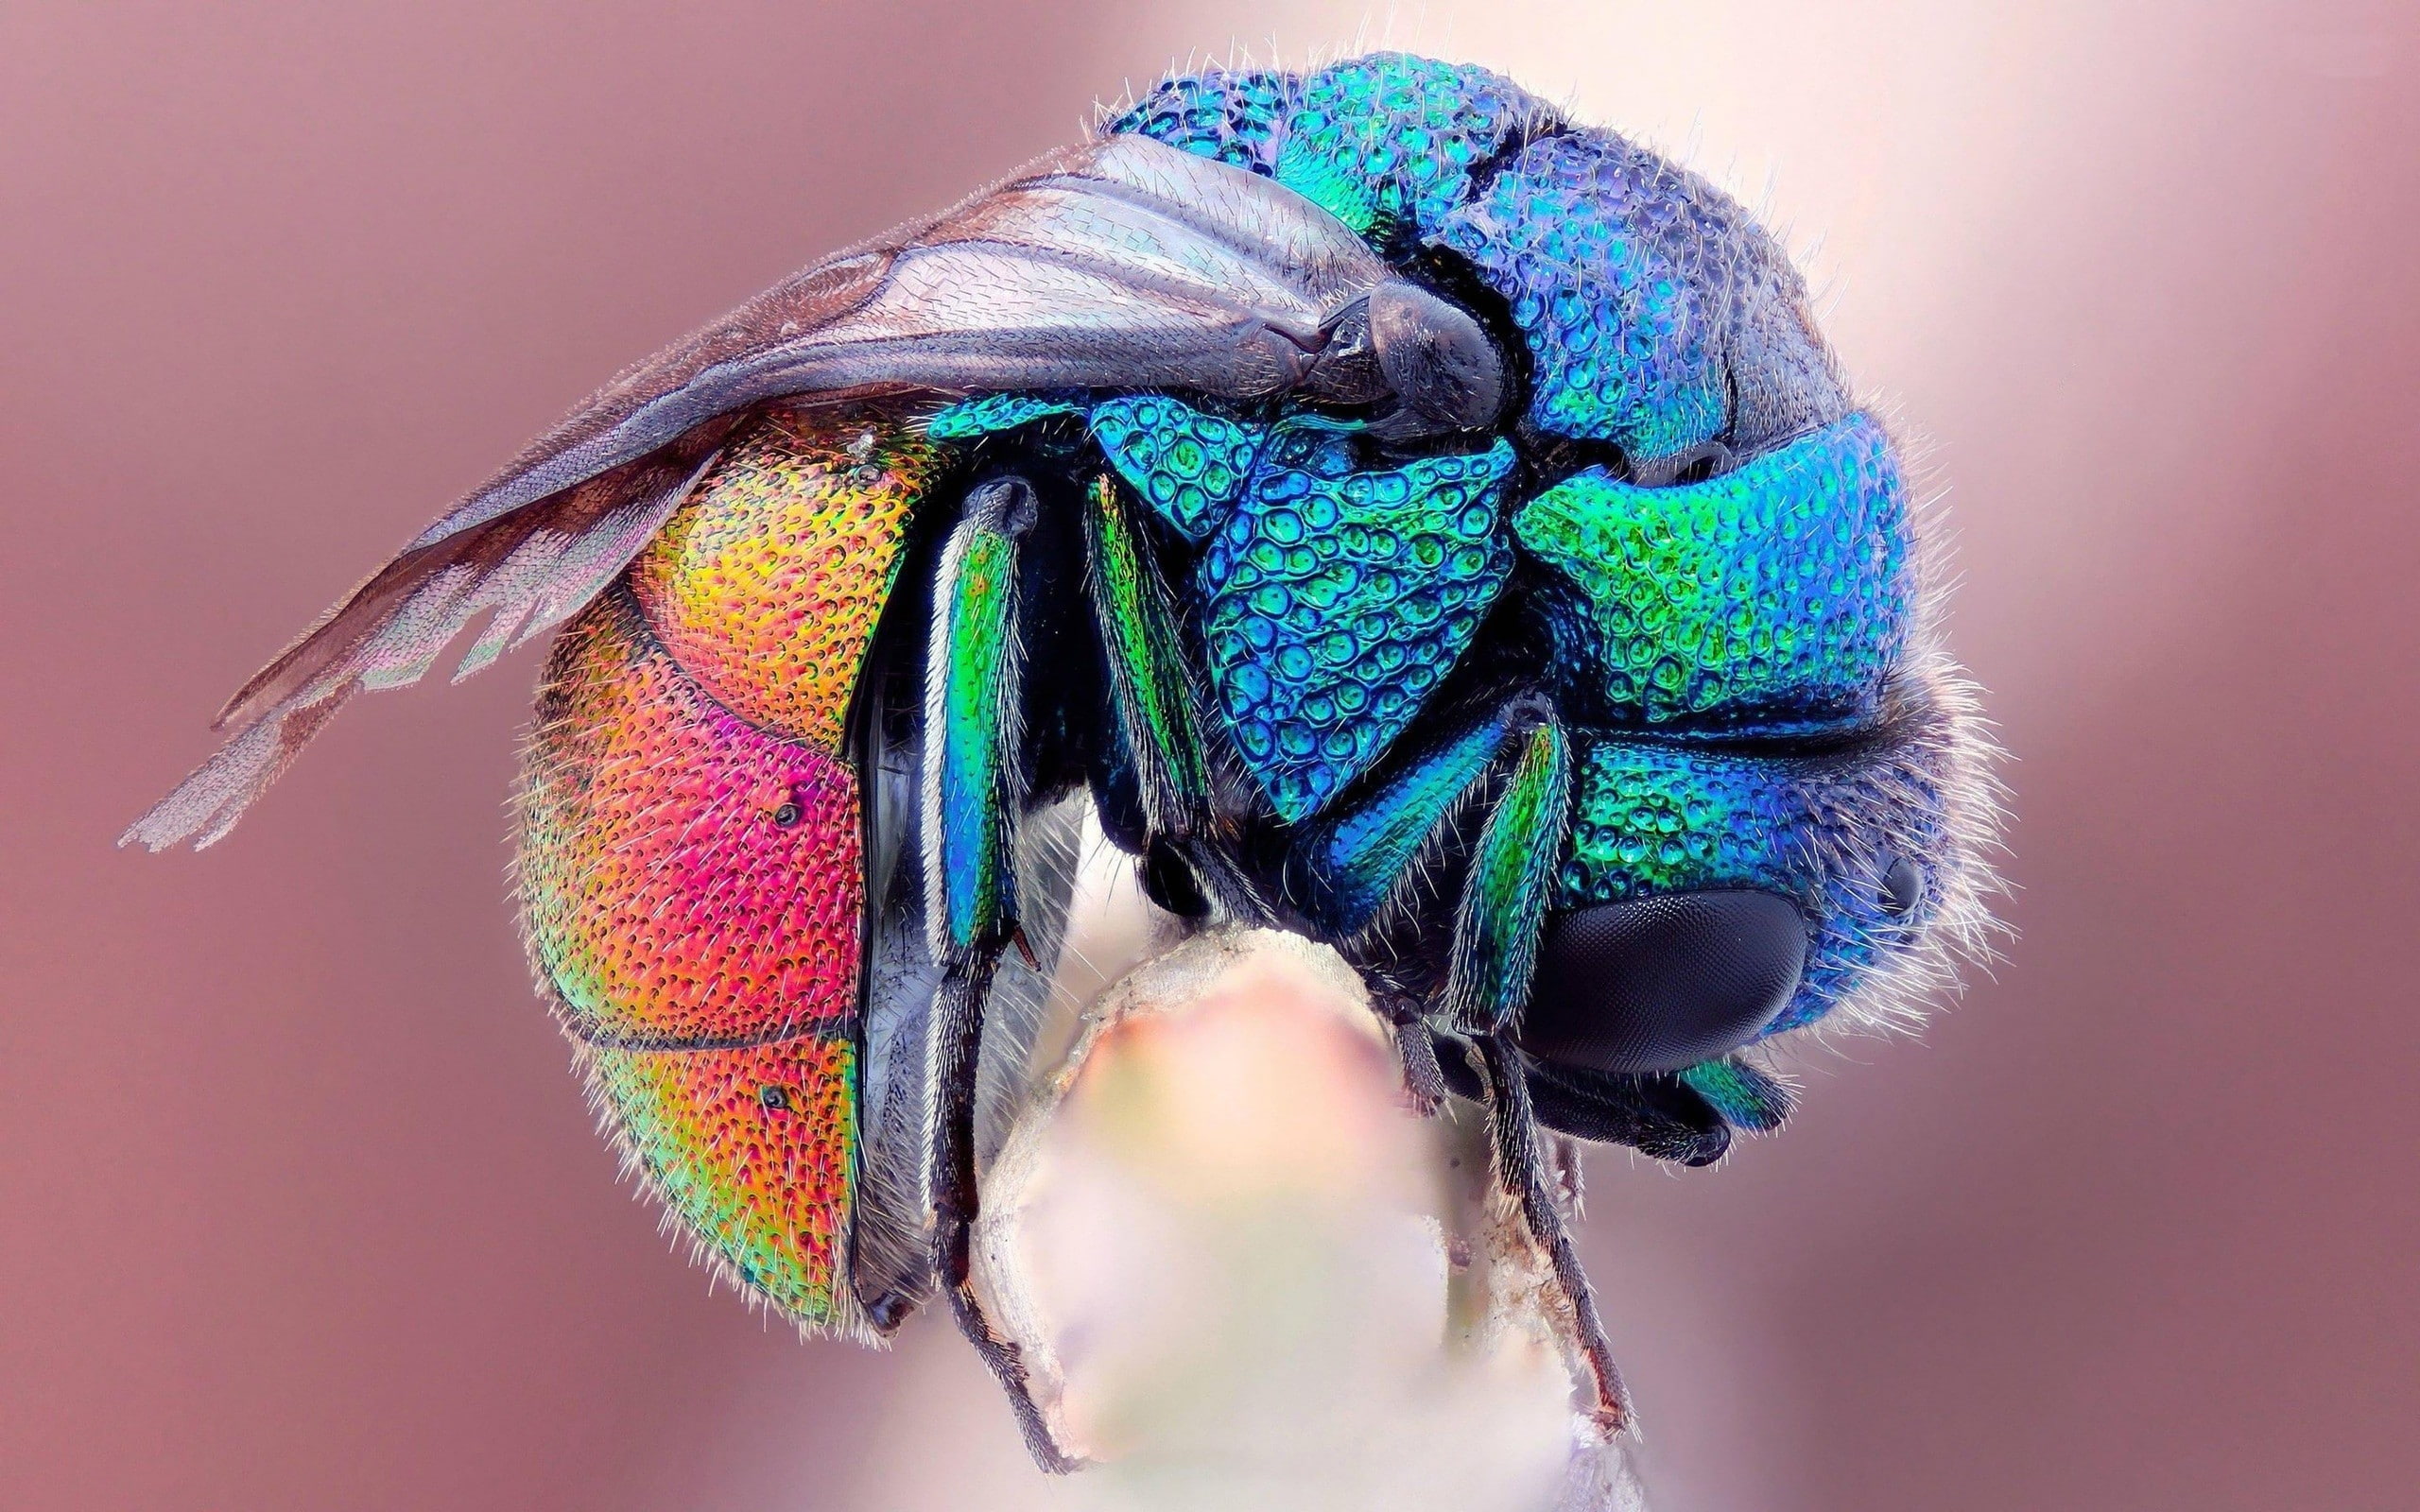 animals, insect, colorful, studio shot, close-up, multi colored